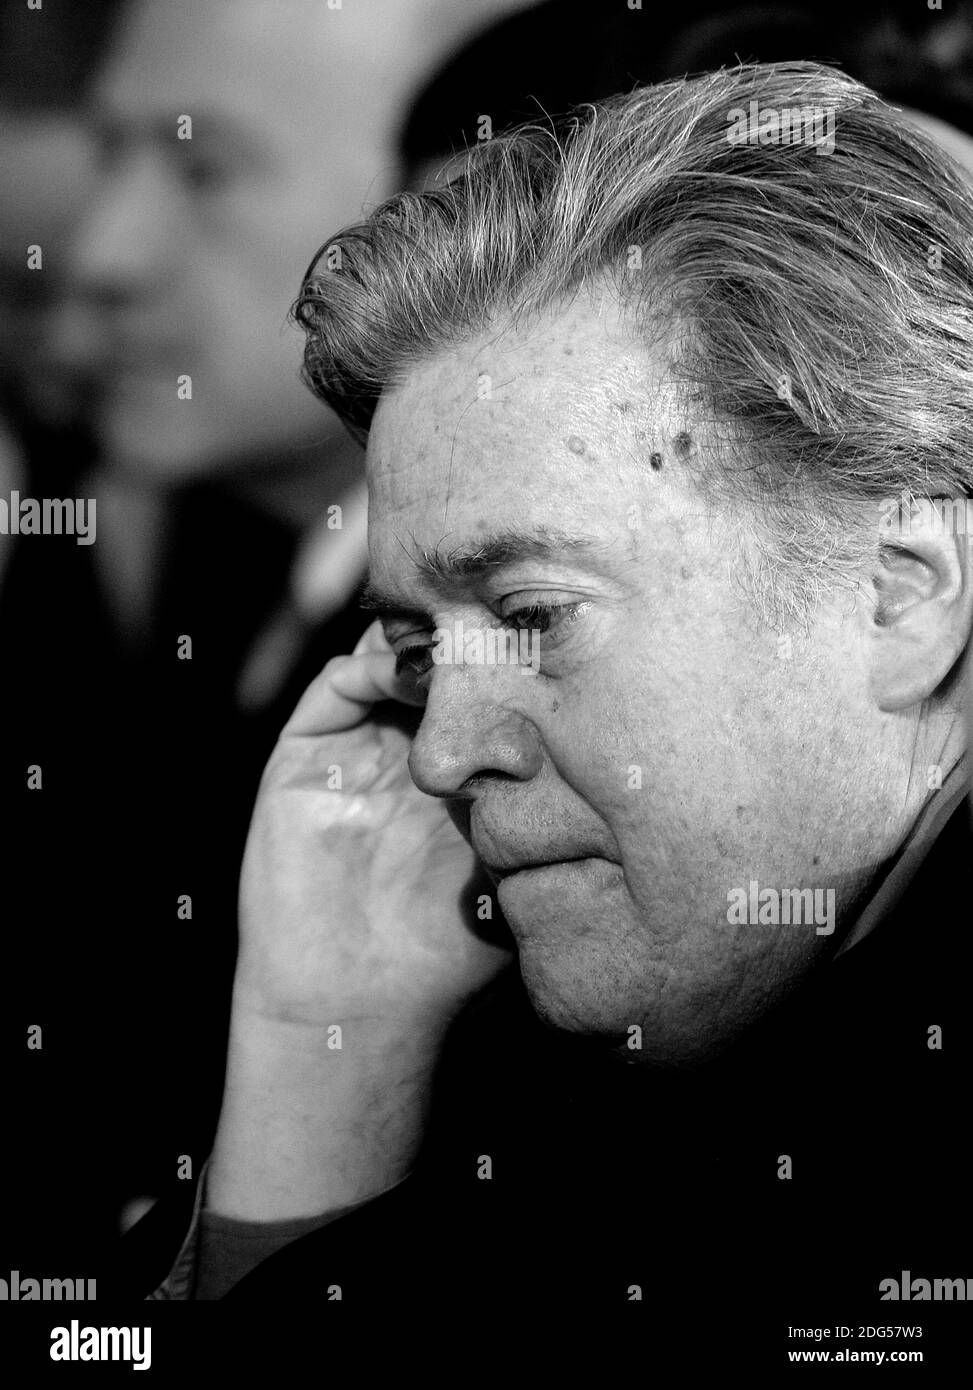 President Trump, Chief Strategist Steve Bannon looks on in the East Room of the White House on February 10, 2017 in Washington, D.C. Photo by Olivier Douliery/Abaca Stock Photo